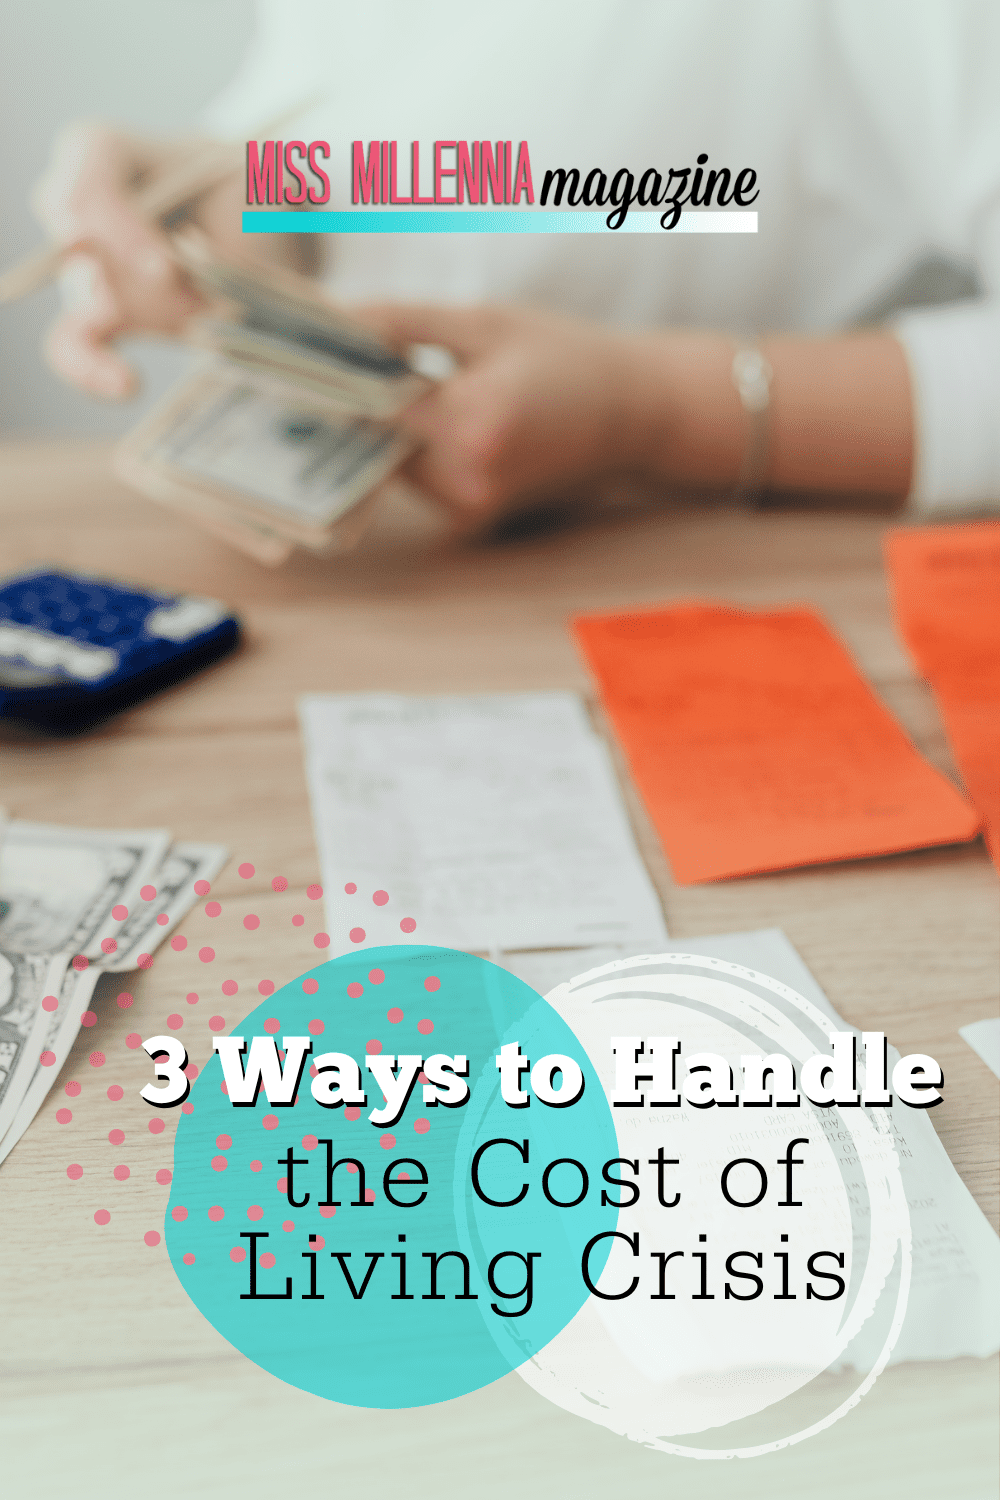 3 Ways to Handle the Cost of Living Crisis